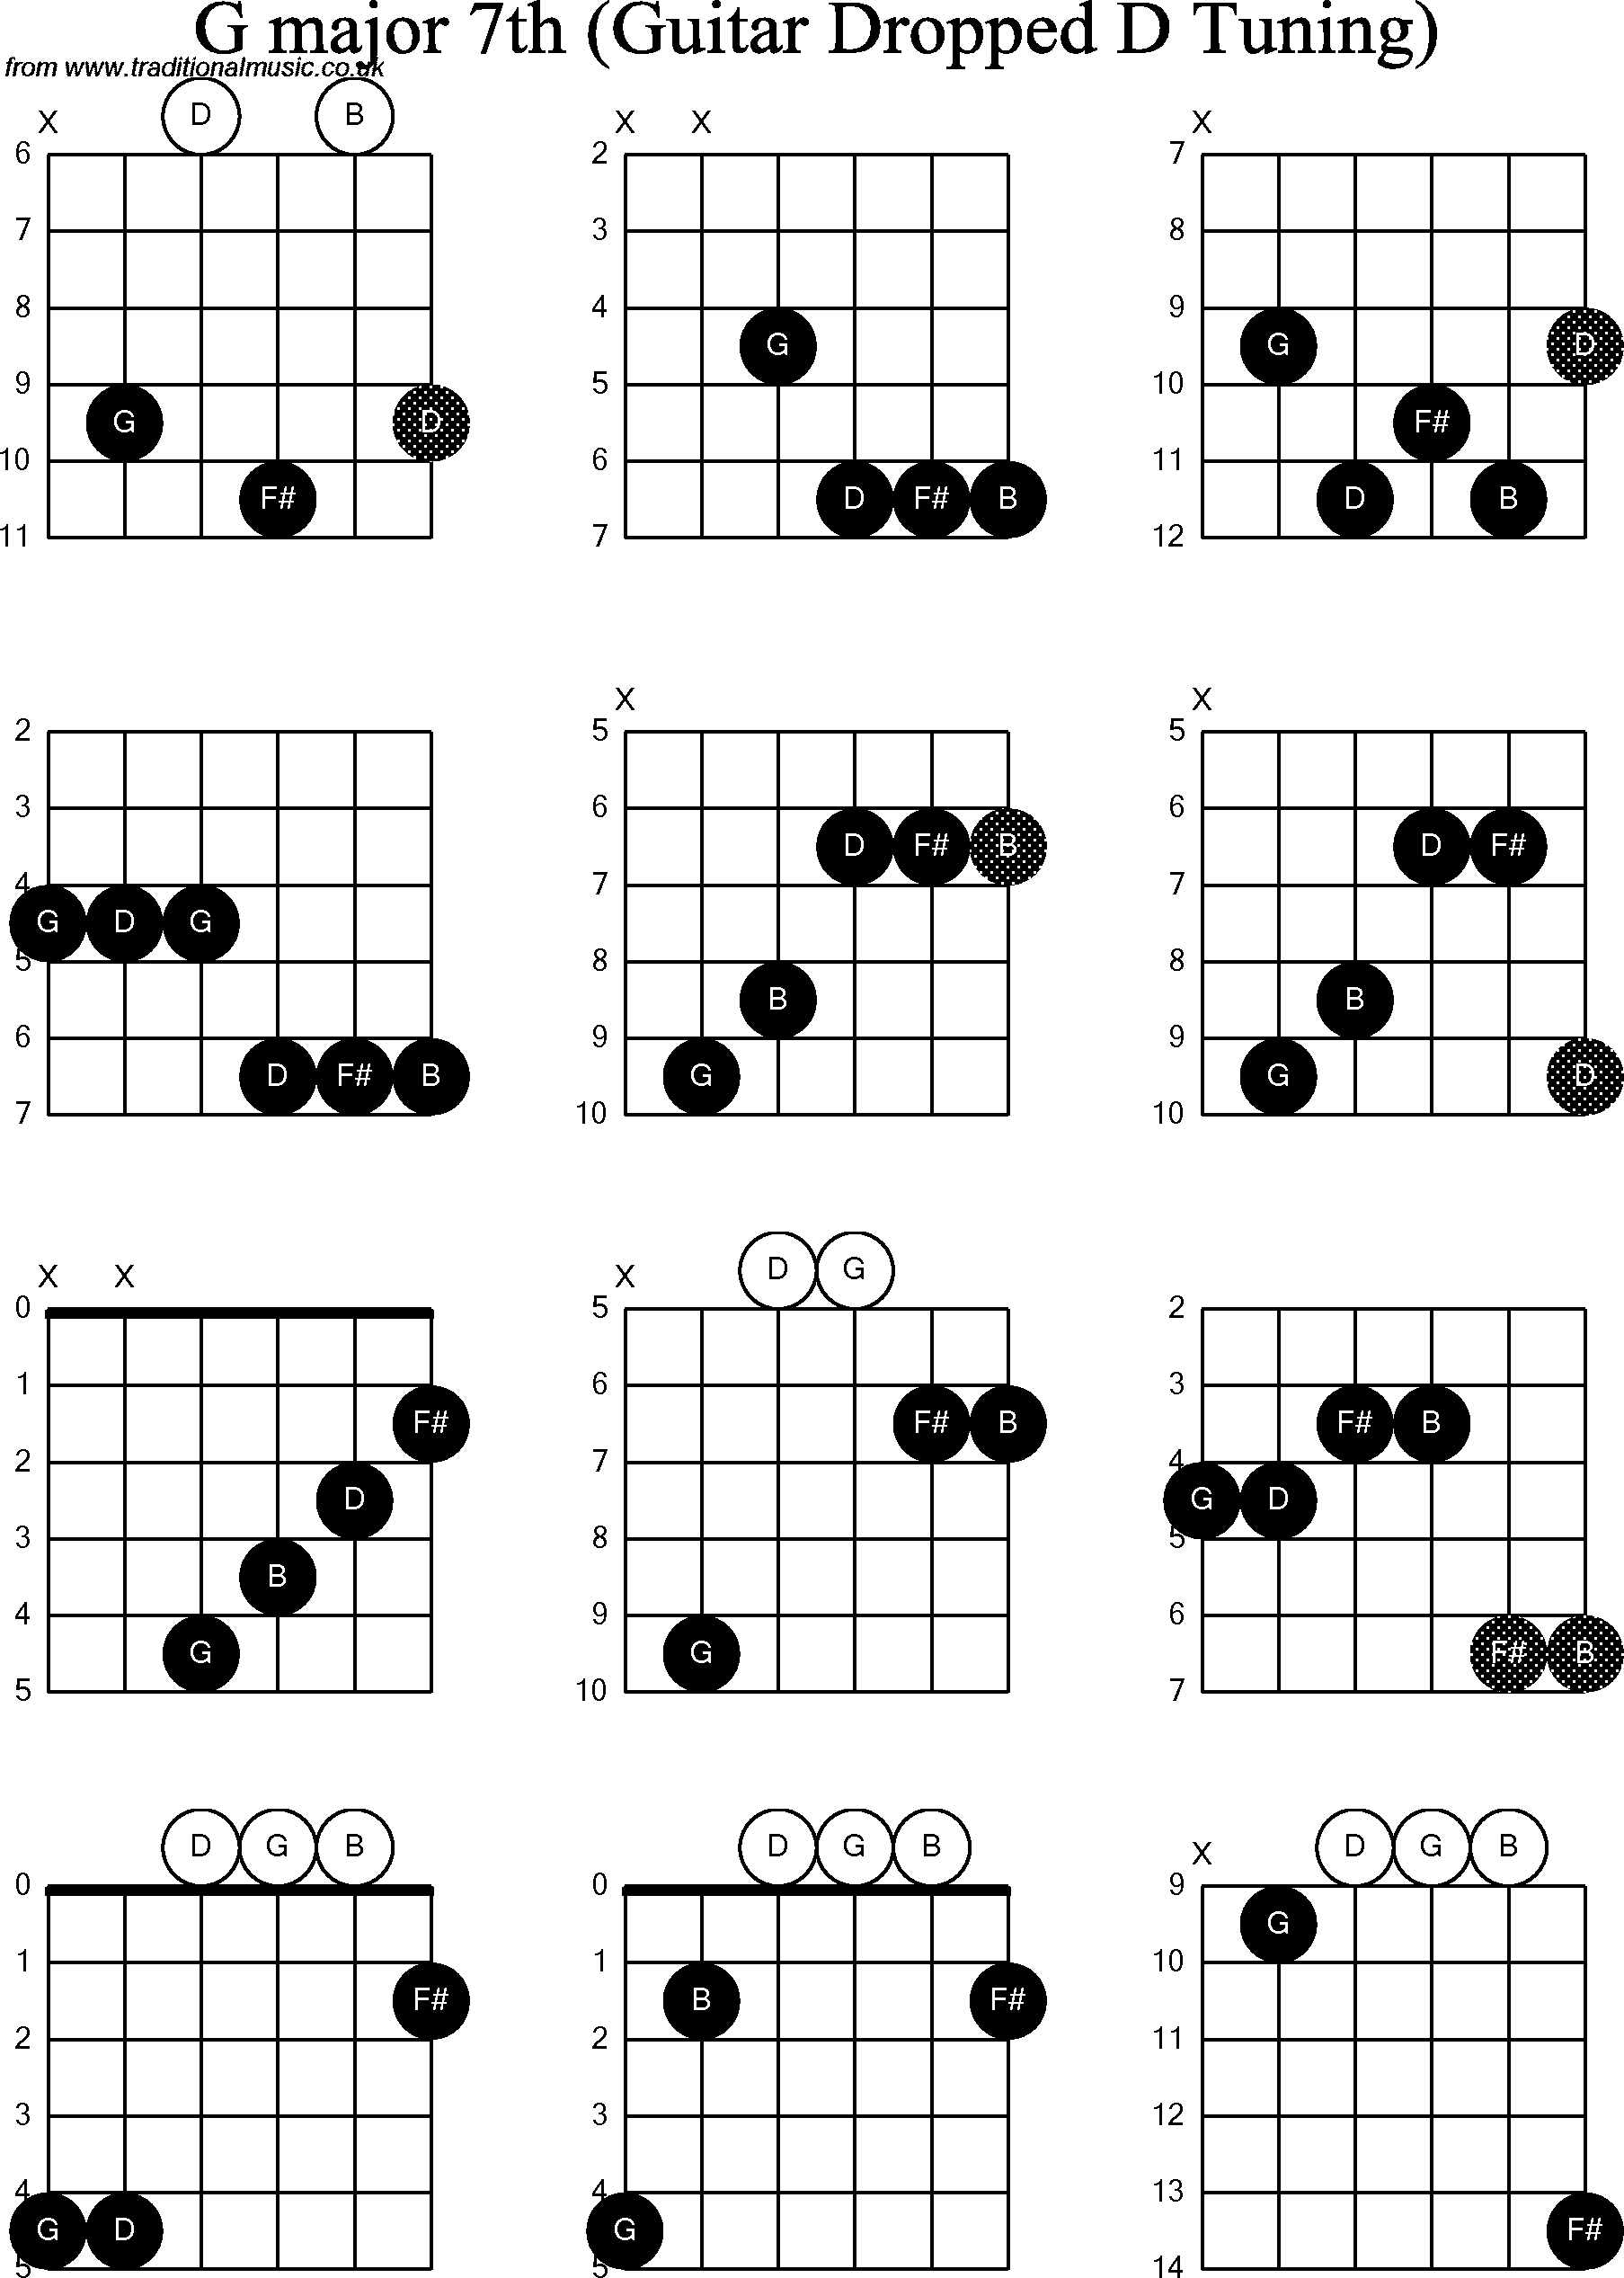 Chord diagrams for Dropped D Guitar(DADGBE), A Major7th